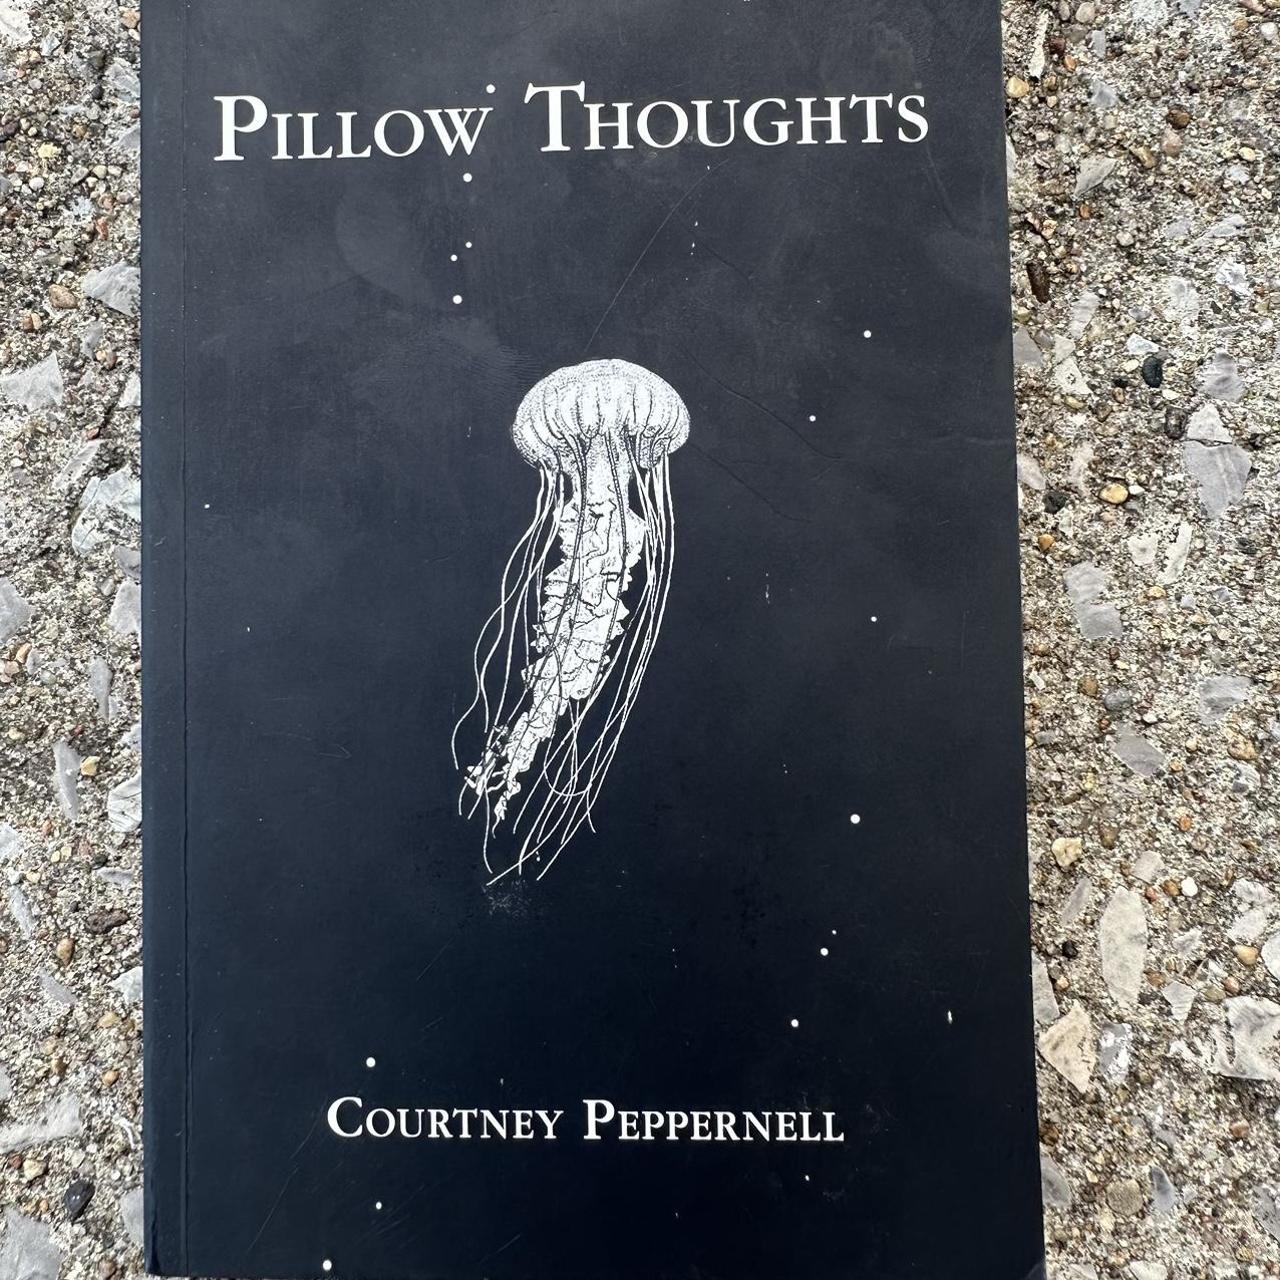 Pillow Thoughts by Courtney Peppernell #poems... - Depop